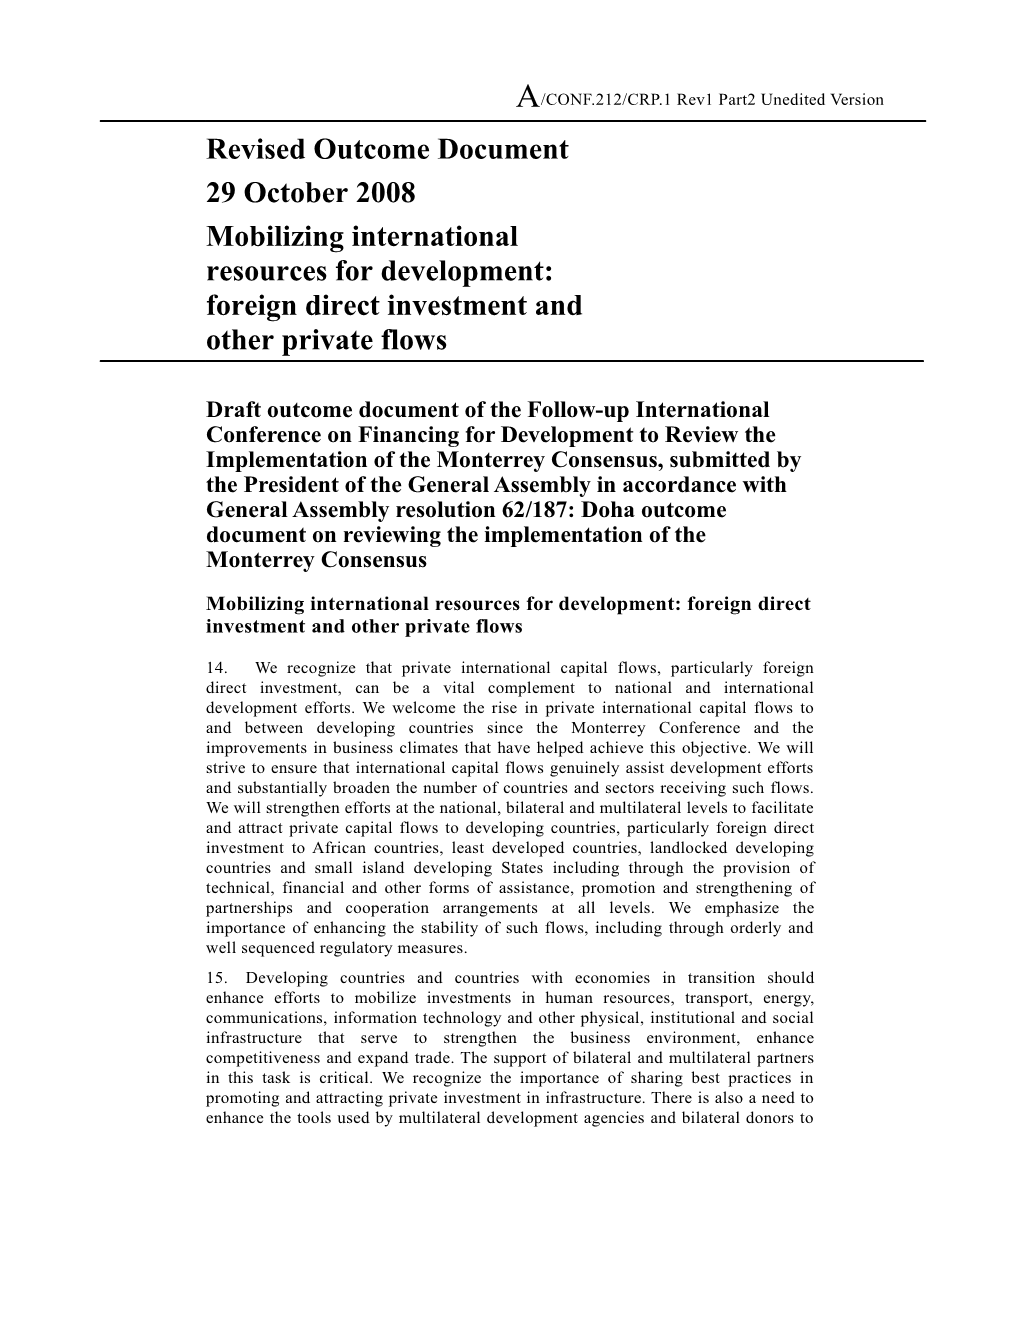 Draft Outcome Document of the Follow-Up International Conference on Financing for Development